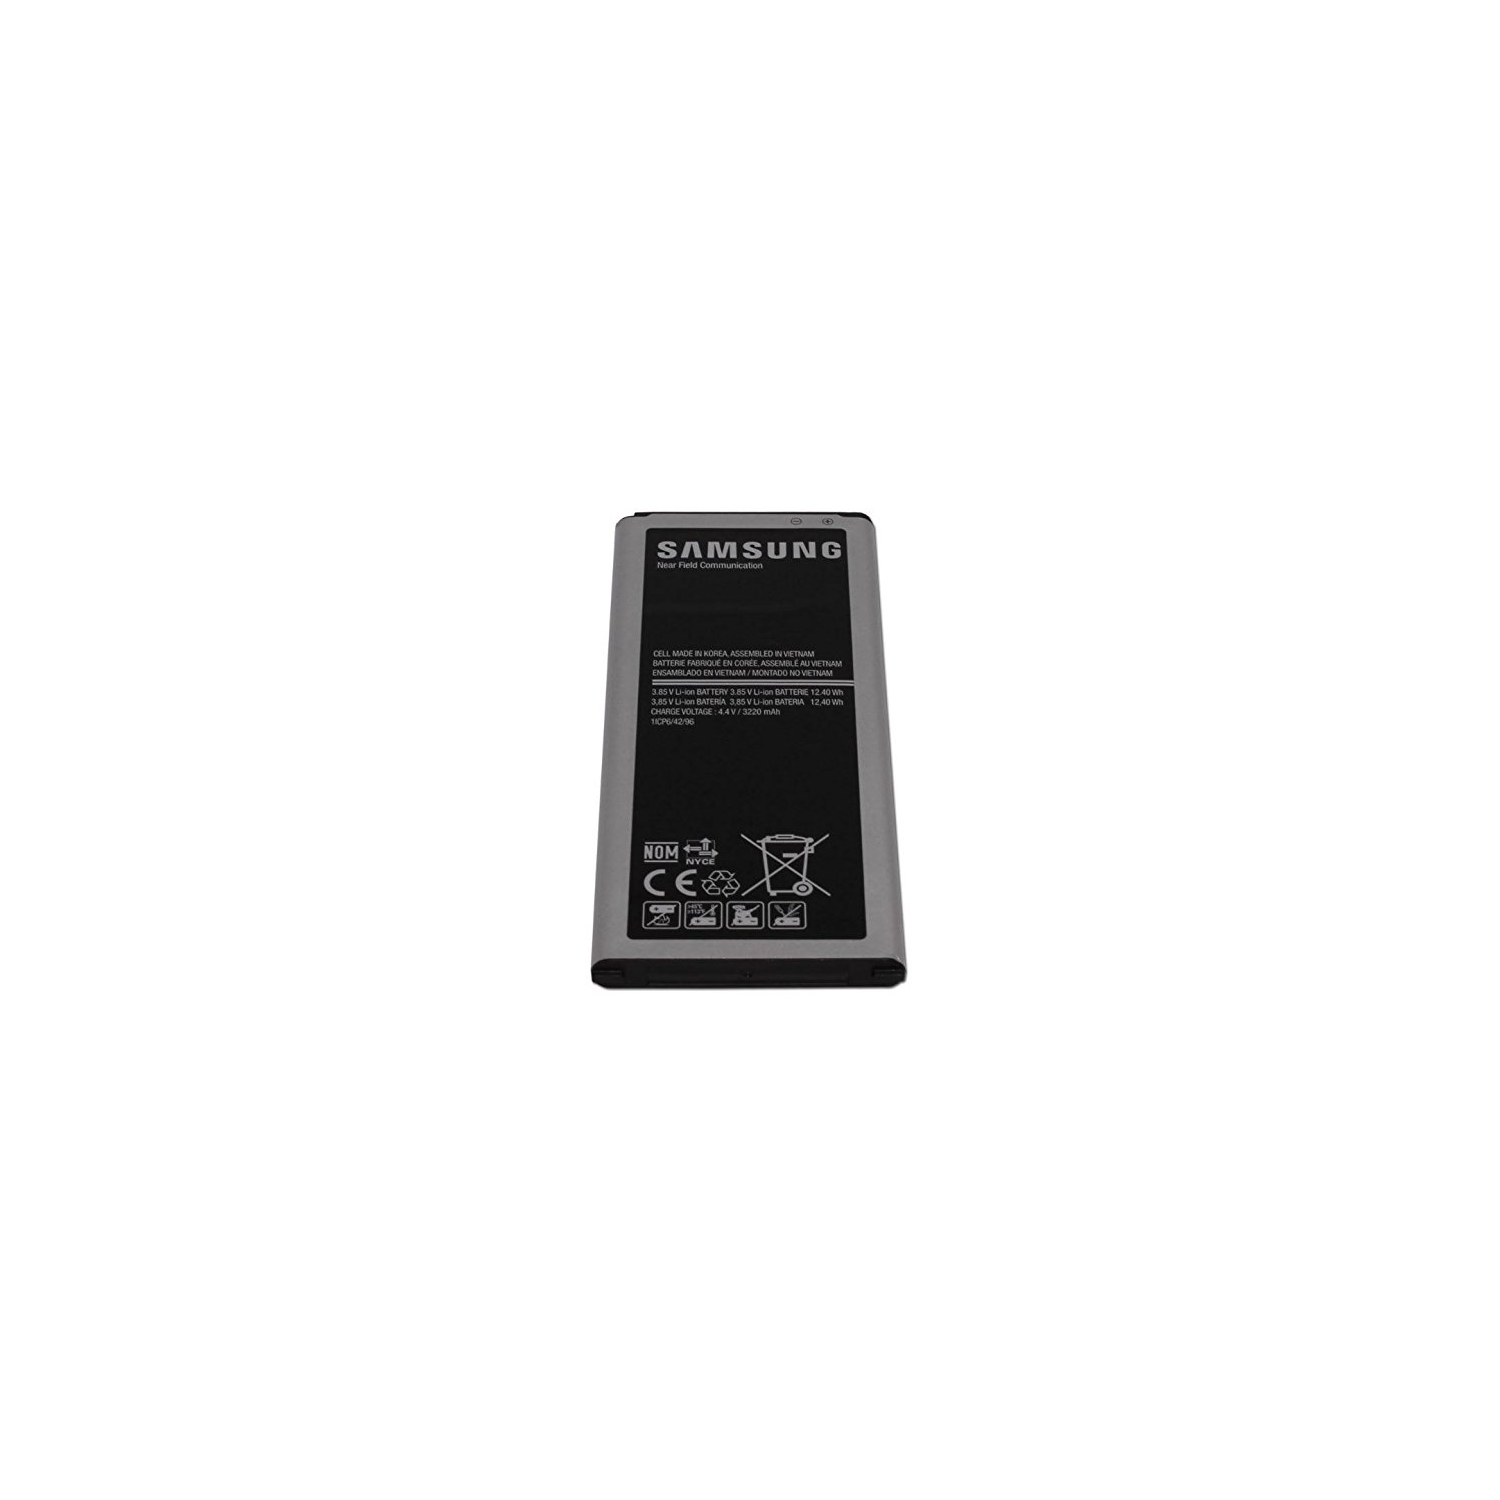 Original Samsung Galaxy Note 4 Battery EB-BN910BBE EBBN910BBE 3220mAh WITH NFC Technology - Non Retail Packaging